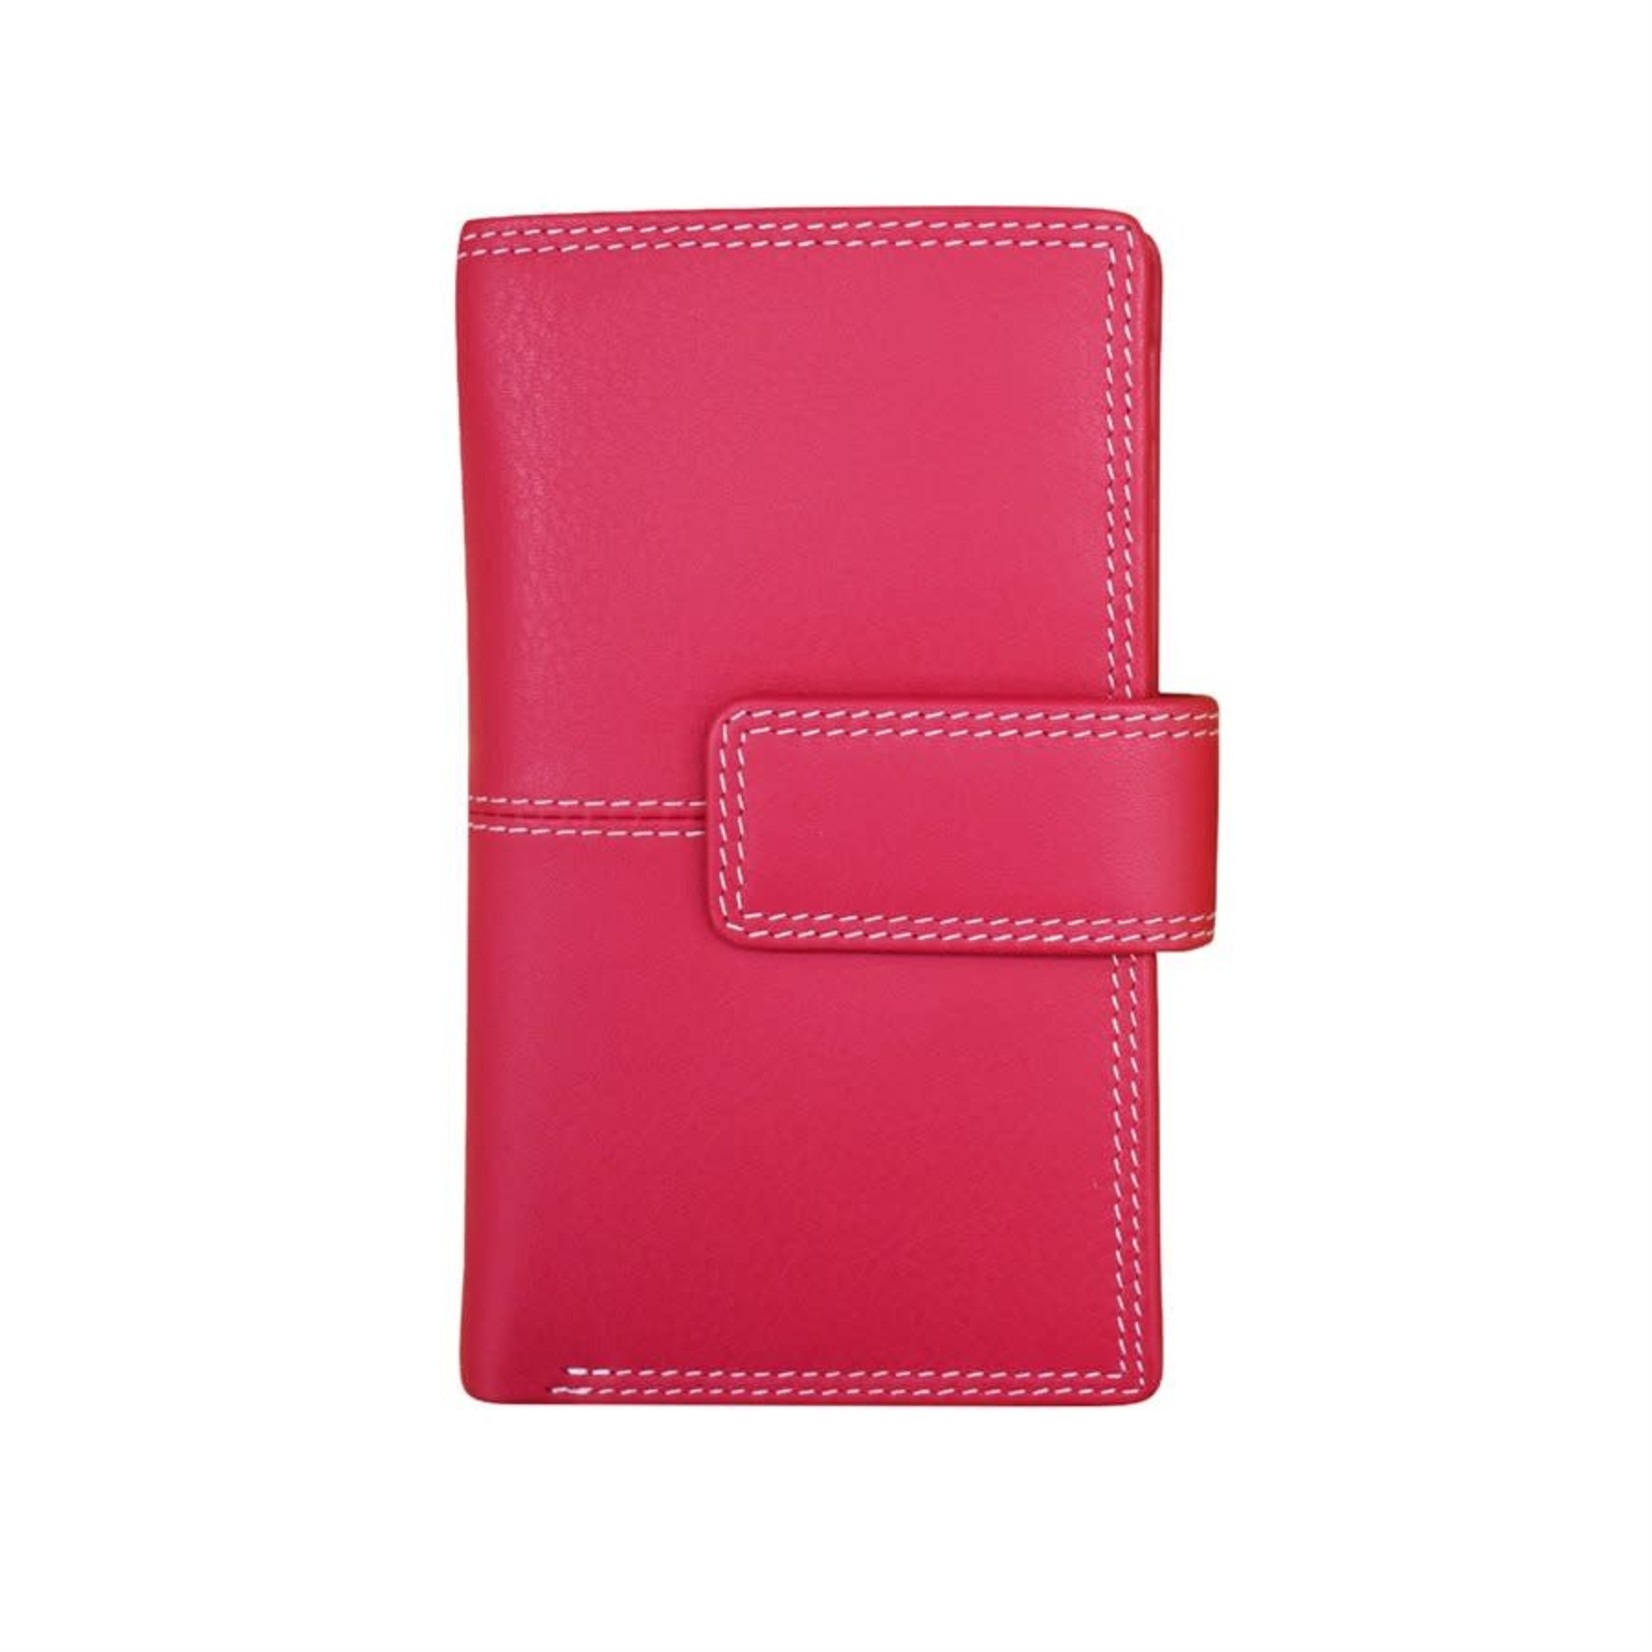 Leather Handbags and Accessories 7826 Indian Pink - Midi Wallet